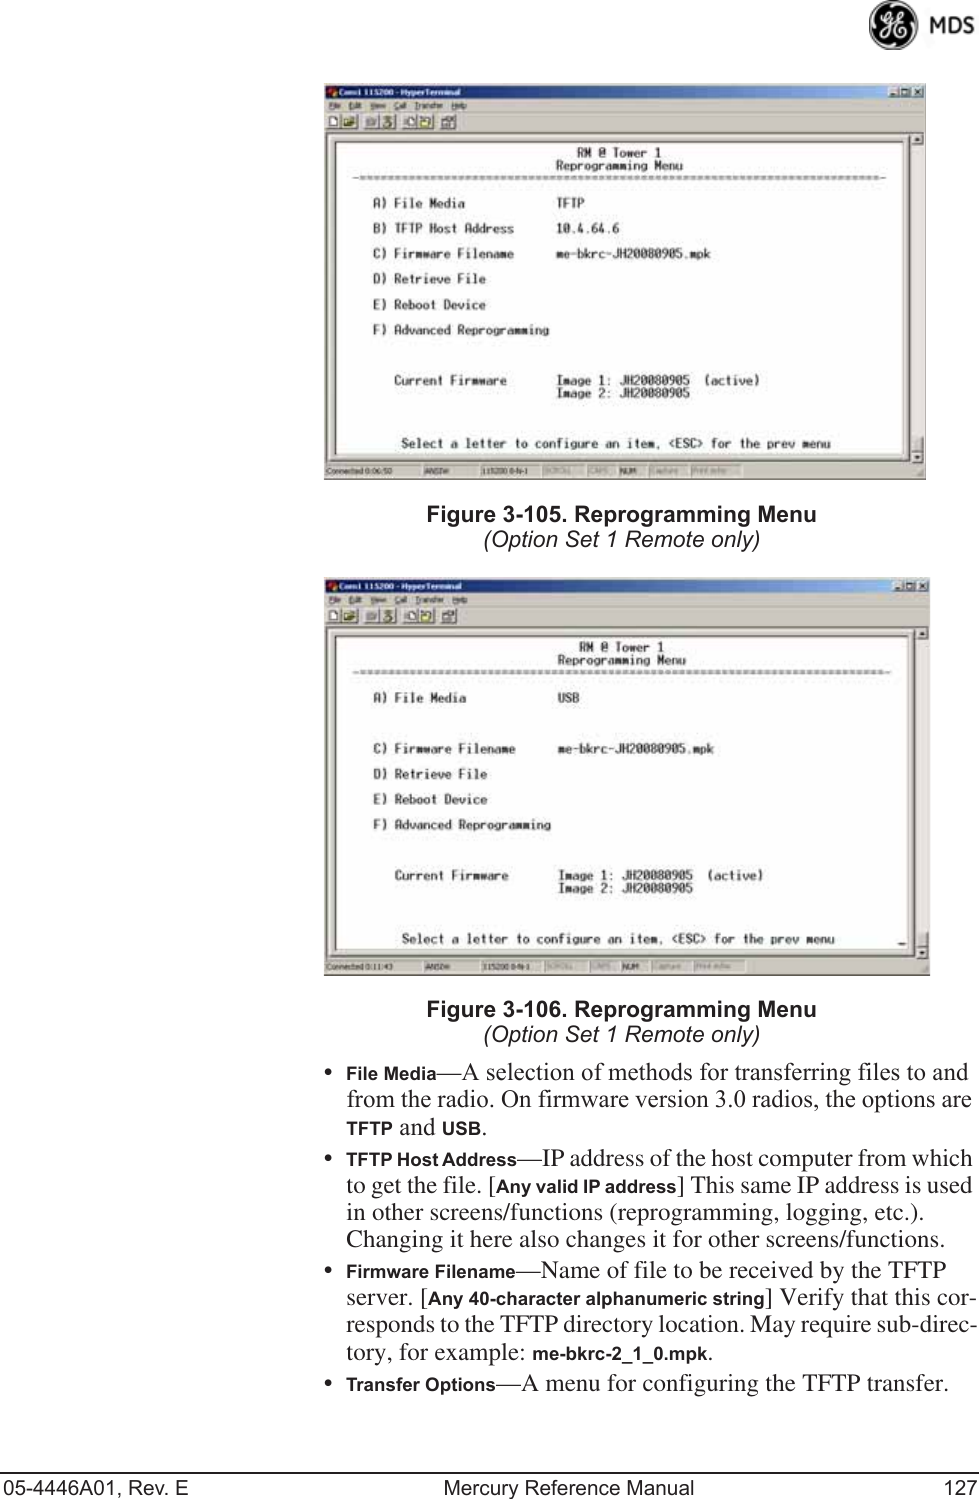 05-4446A01, Rev. E Mercury Reference Manual 127Invisible place holderFigure 3-105. Reprogramming Menu(Option Set 1 Remote only)Invisible place holderFigure 3-106. Reprogramming Menu(Option Set 1 Remote only)•File Media—A selection of methods for transferring files to and from the radio. On firmware version 3.0 radios, the options are TFTP and USB.•TFTP Host Address—IP address of the host computer from which to get the file. [Any valid IP address] This same IP address is used in other screens/functions (reprogramming, logging, etc.). Changing it here also changes it for other screens/functions.•Firmware Filename—Name of file to be received by the TFTP server. [Any 40-character alphanumeric string] Verify that this cor-responds to the TFTP directory location. May require sub-direc-tory, for example: me-bkrc-2_1_0.mpk.•Transfer Options—A menu for configuring the TFTP transfer. 